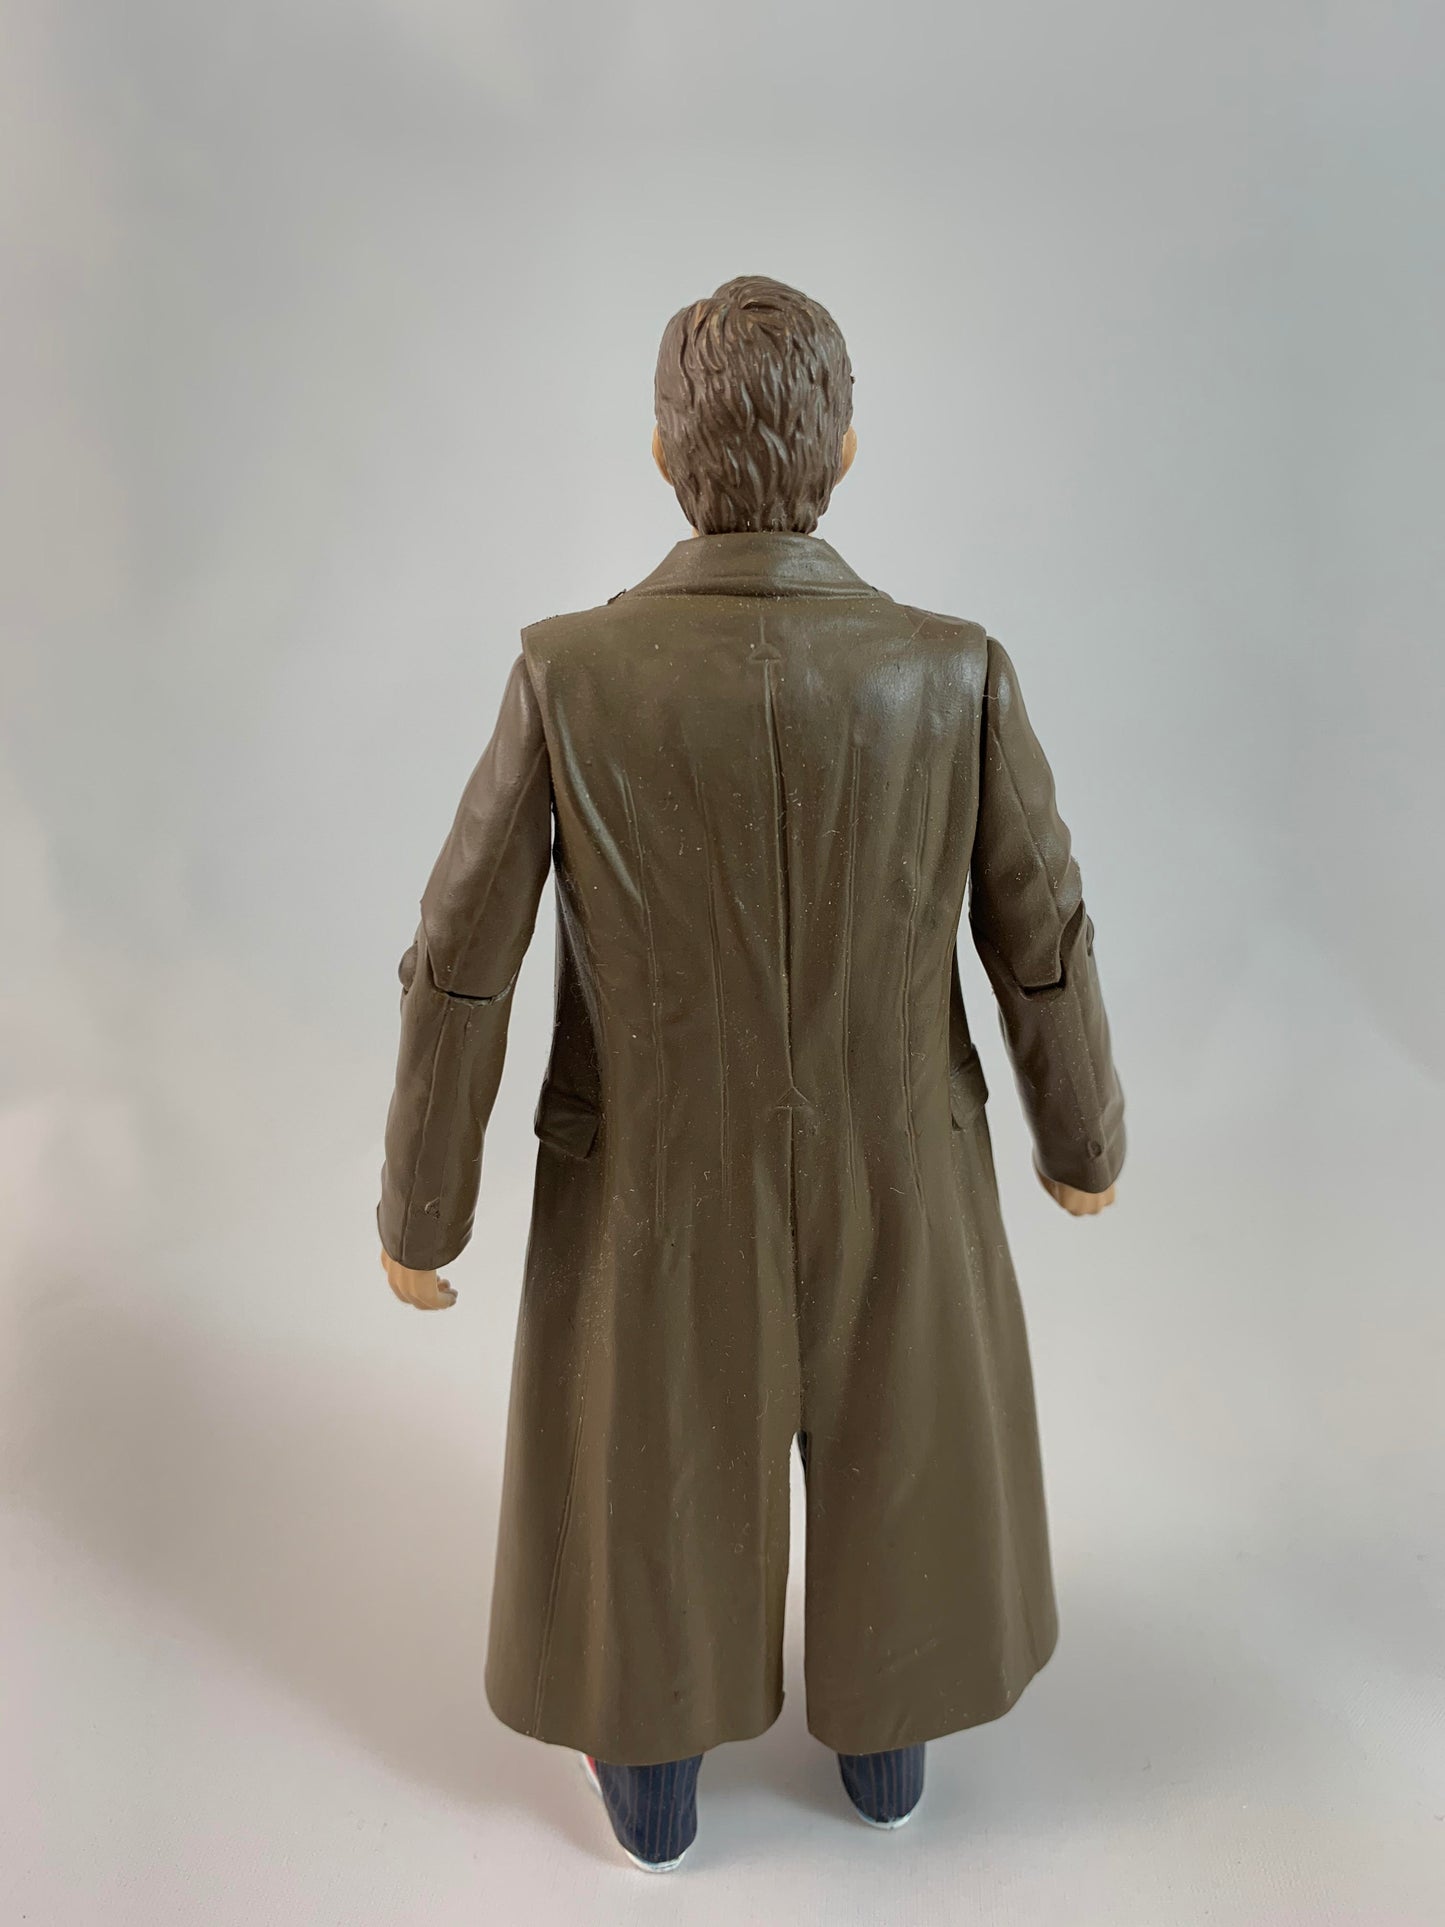 2005 Character Options Doctor Who David Tennant (Ghost Transmission Triangulation Gear) - Loose Action Figure